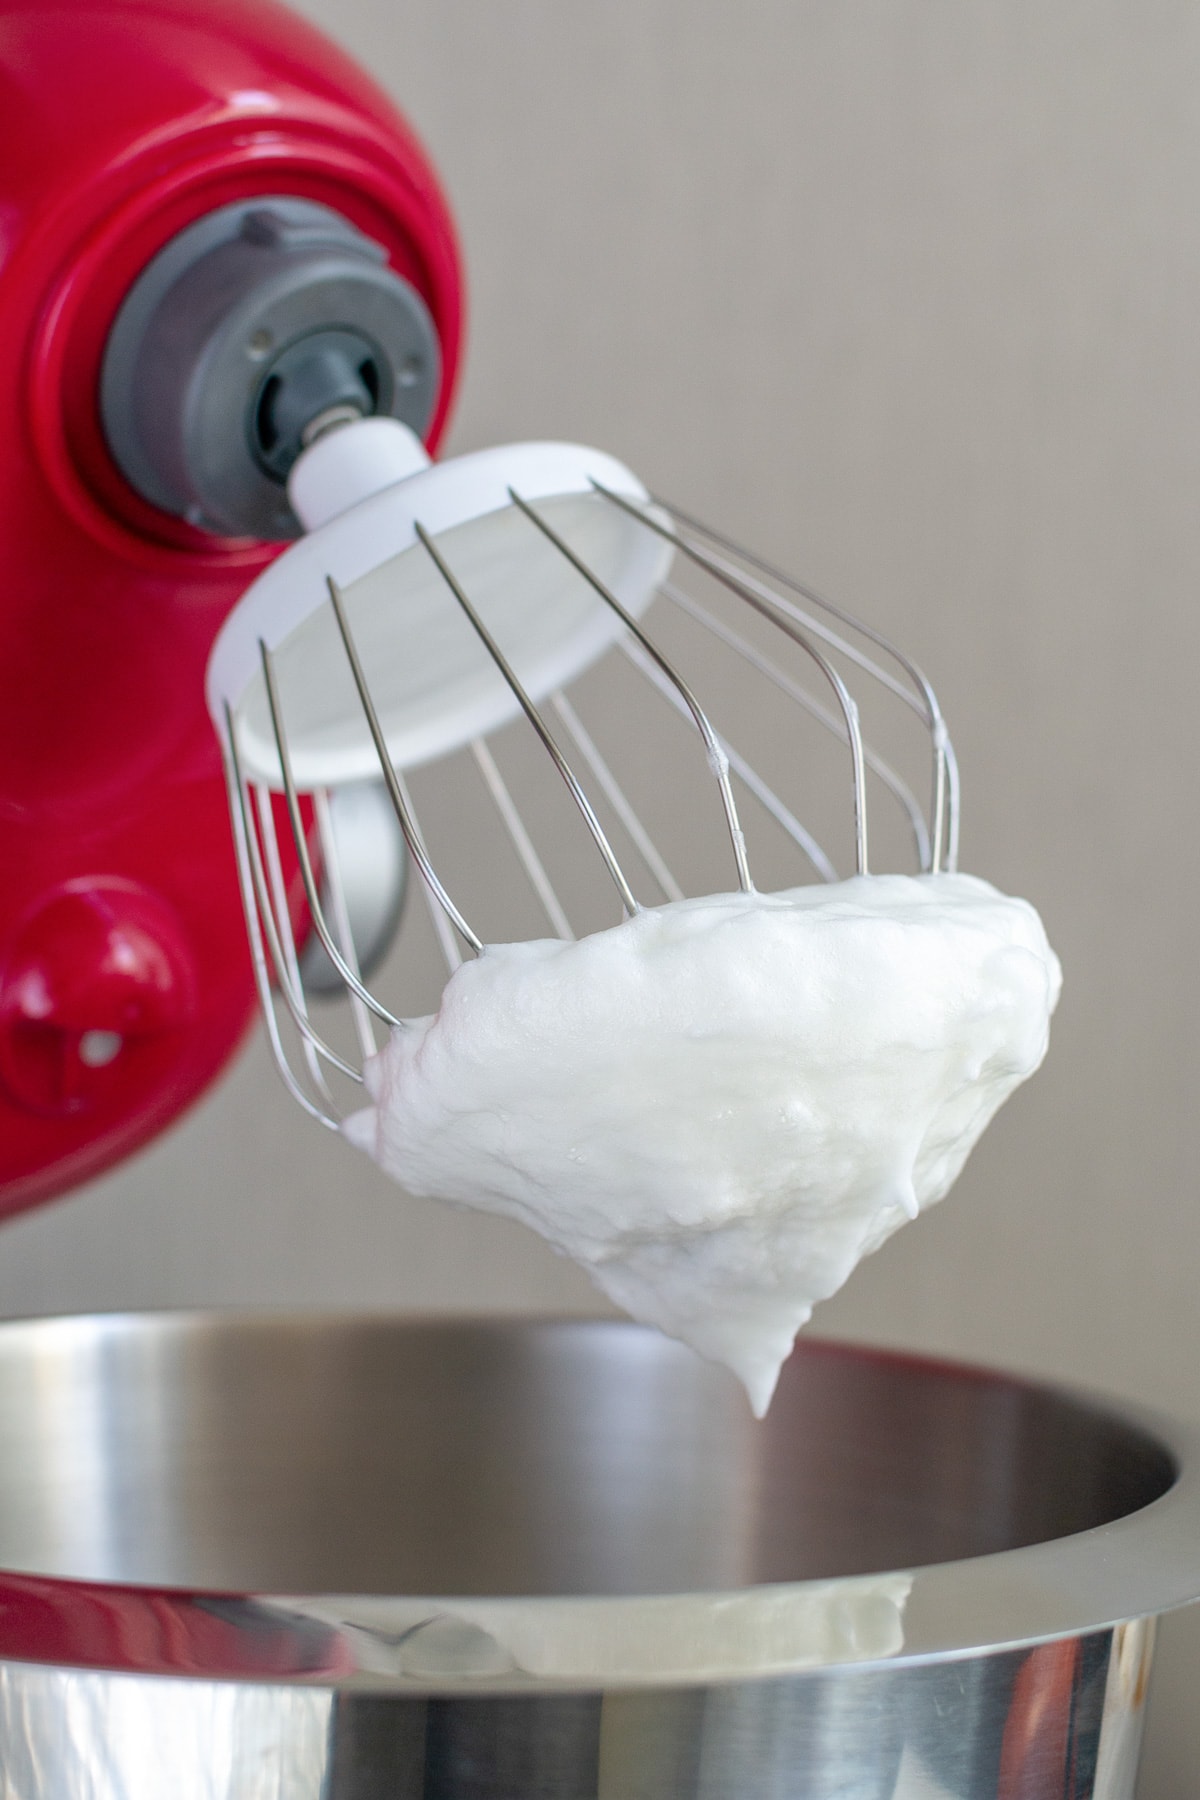 Table mixer with whipped egg whites.